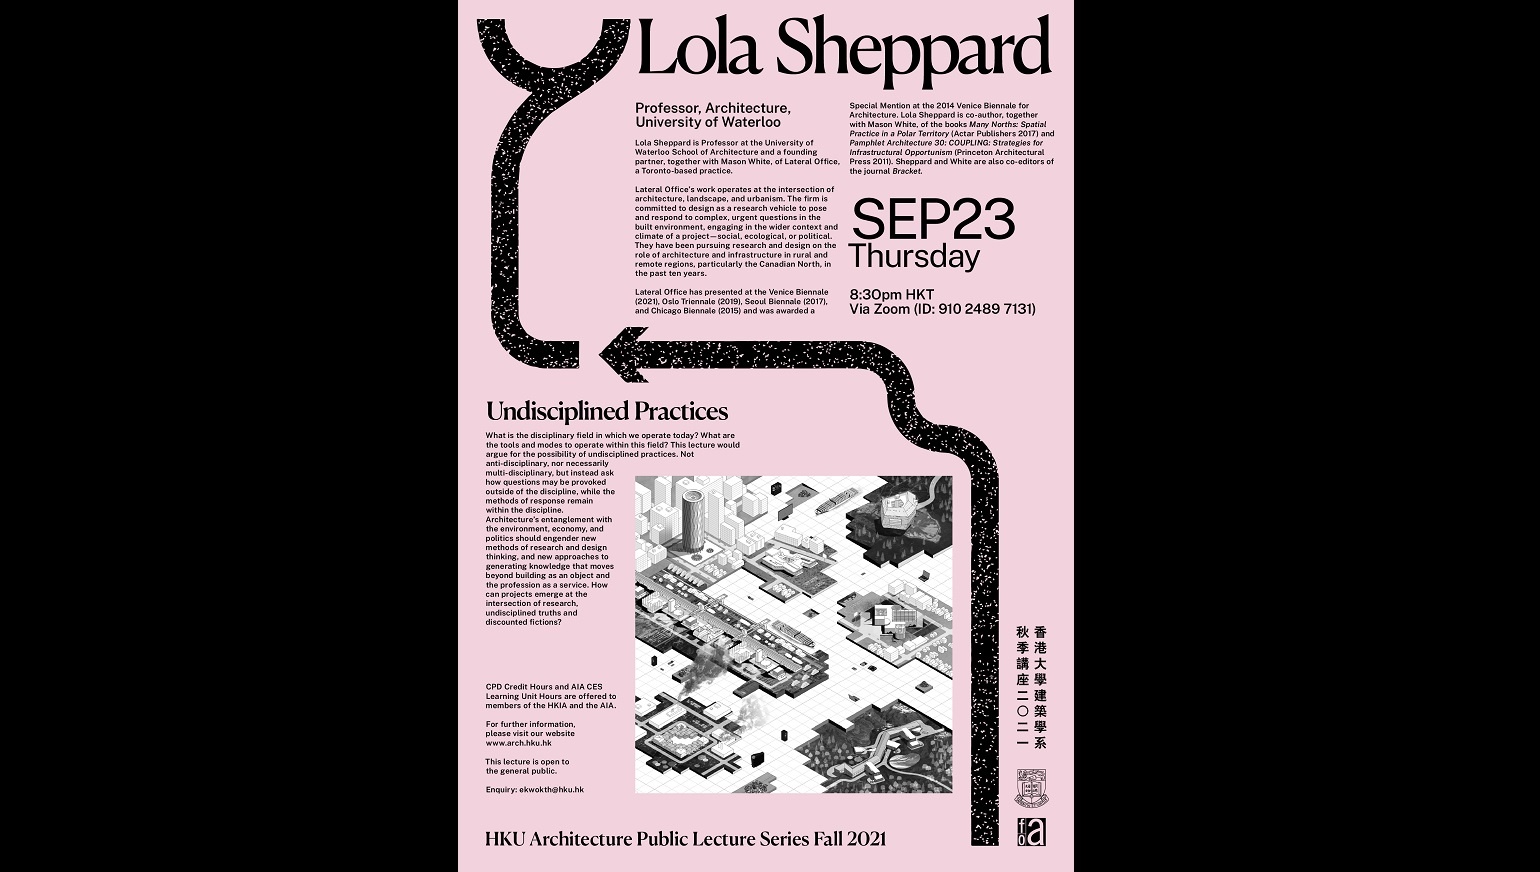 Public Lecture: 'Undisciplined Practices' by Lola Sheppard | HKU Department of Architecture | 23 September | 20:30 | Zoom